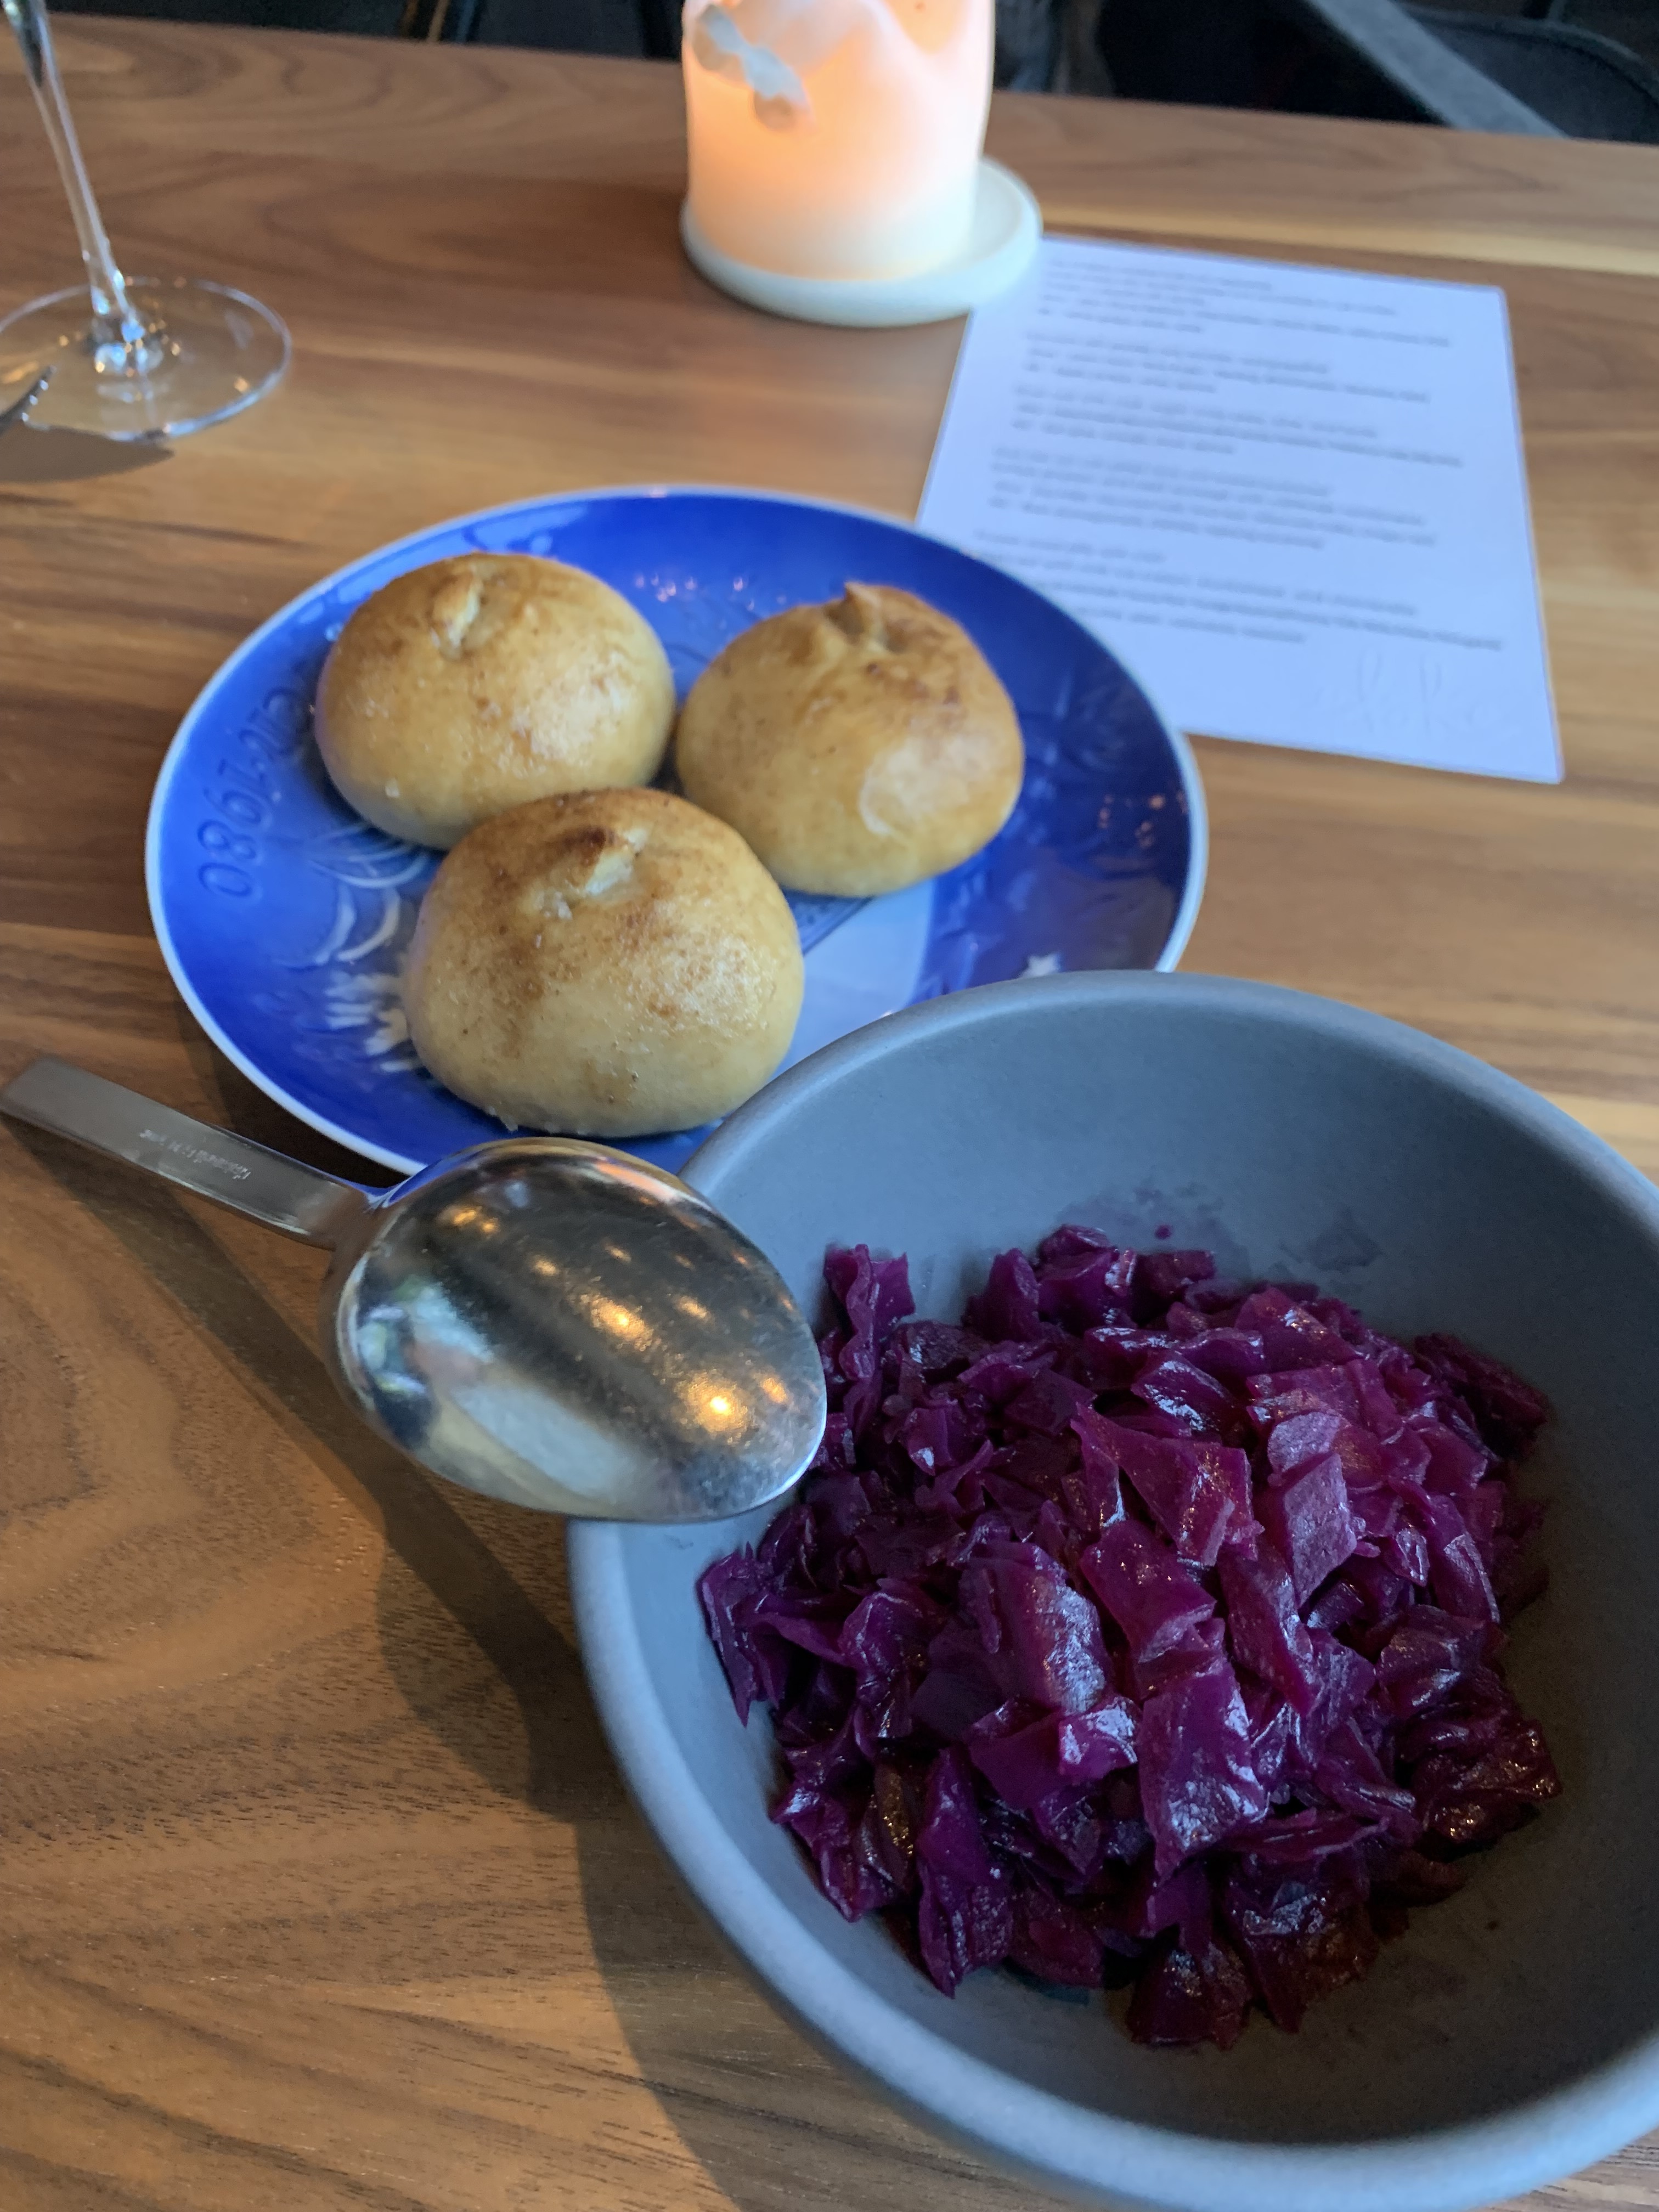 Three little rolls served on a blue plate, with a dark powder topping them. A nearby bowl has pickled red cabbage.